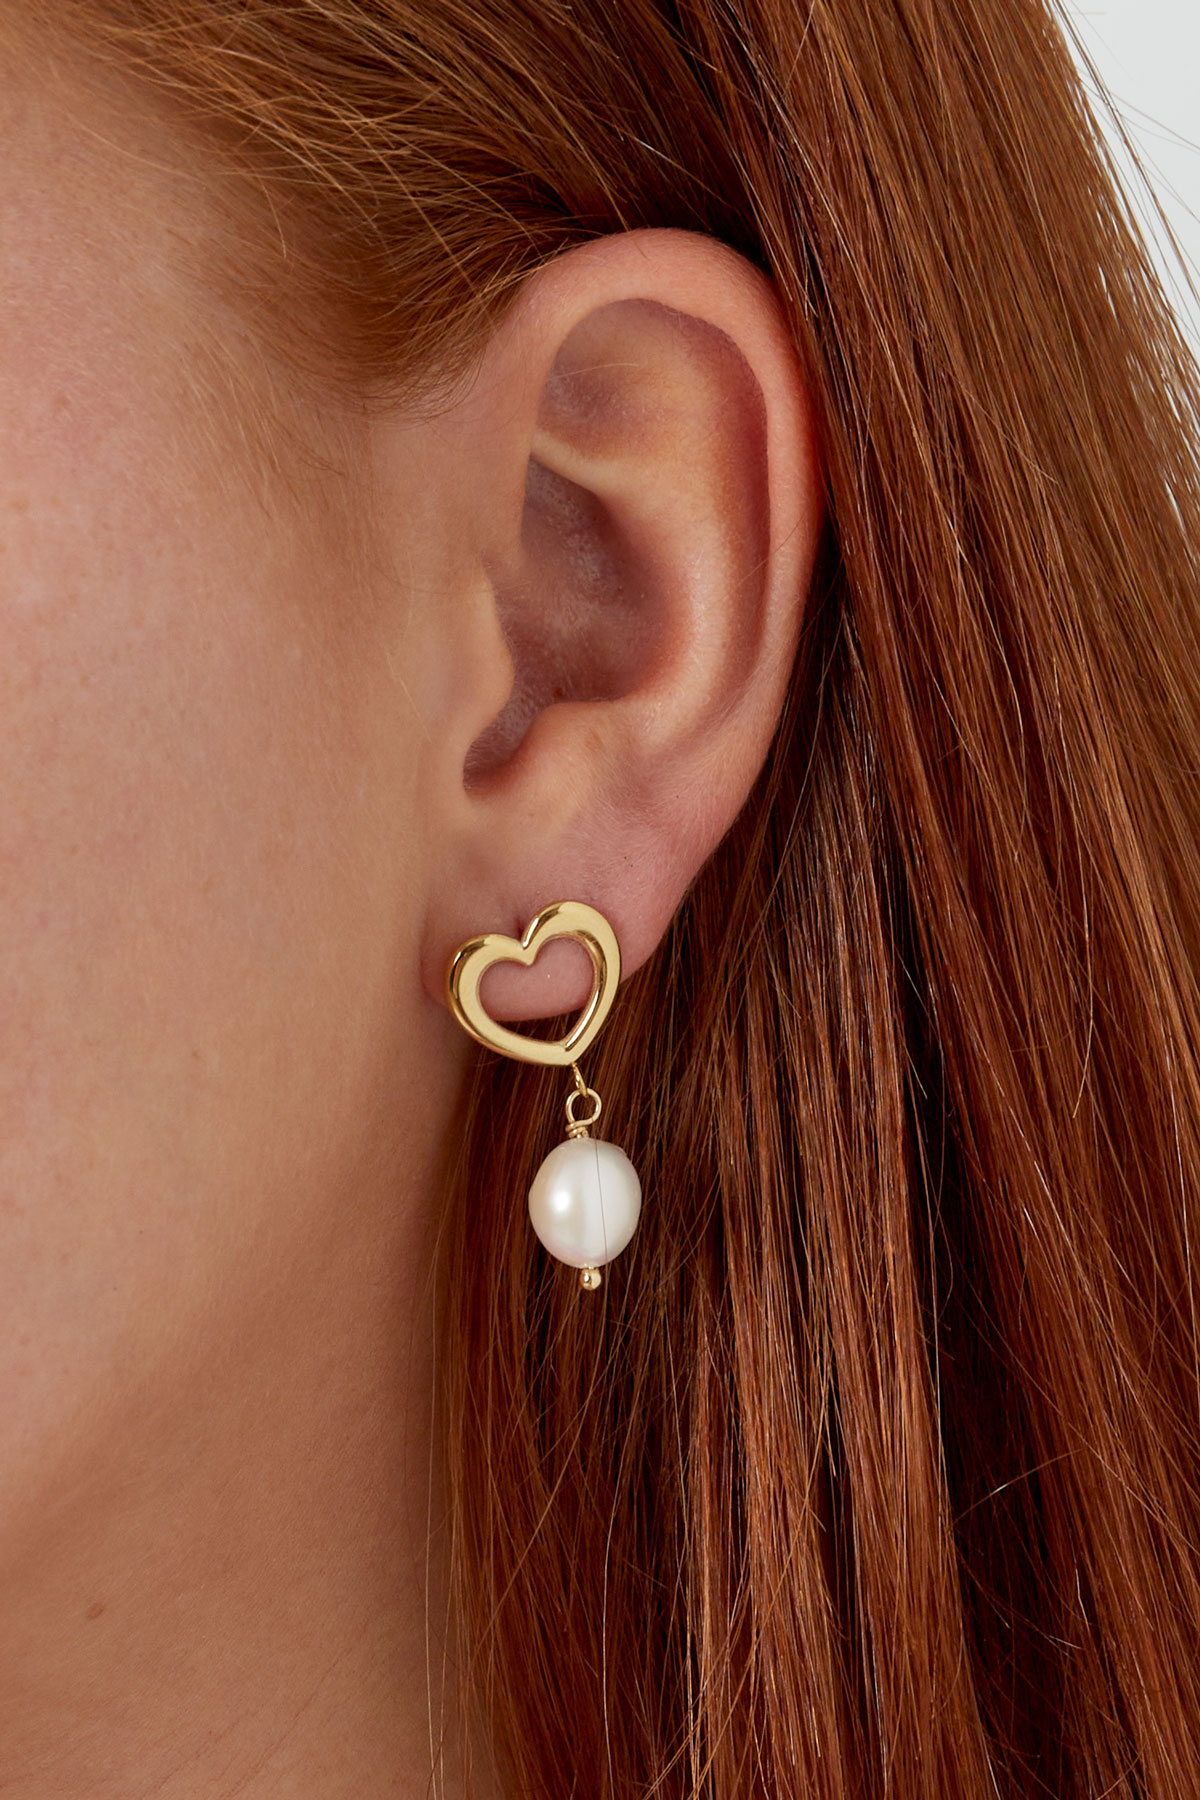 Earring heart with pearl detail - silver stainless steel h5 Picture3